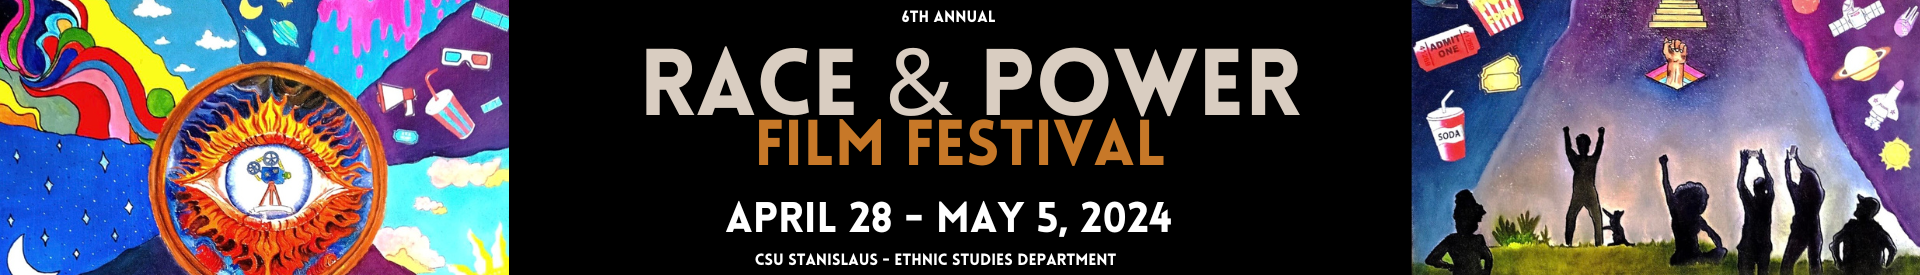 6th Annual Race and Power Film Festival